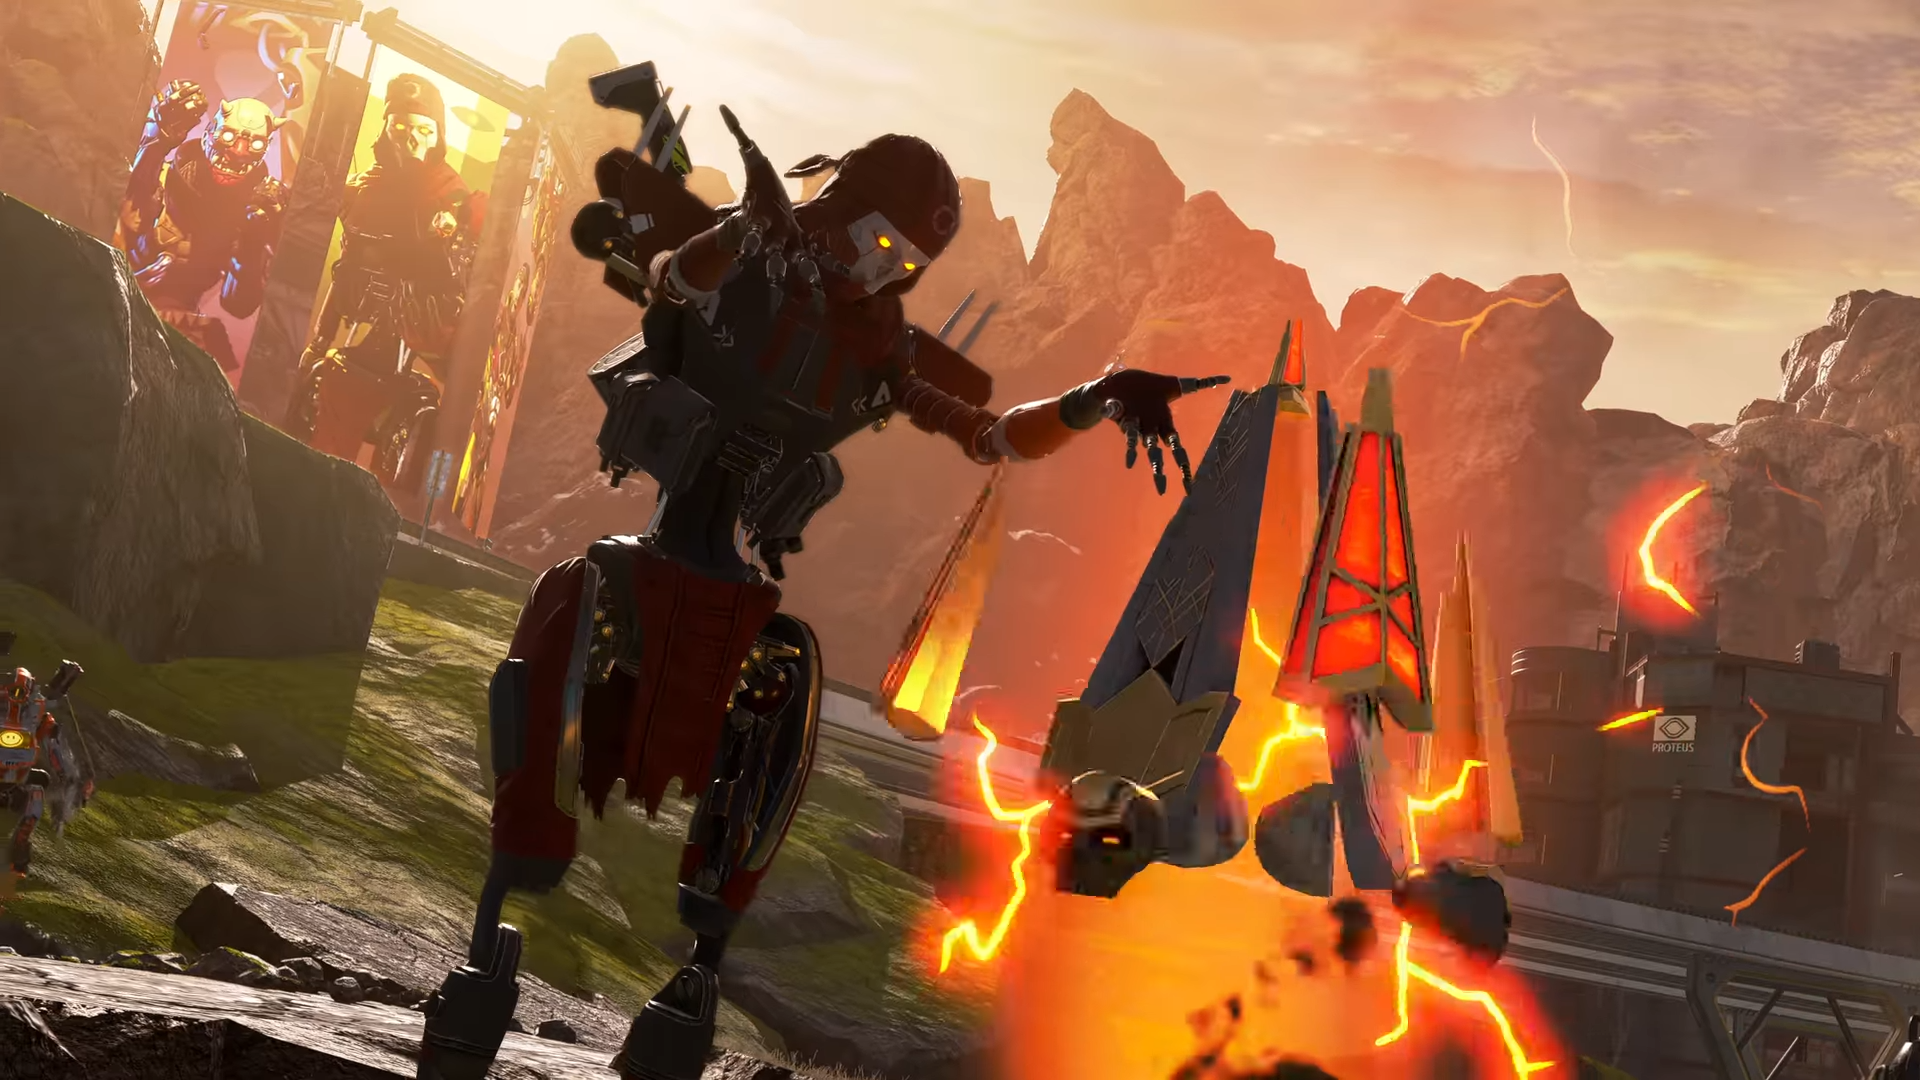 Revenant's powerful abilities were displayed in latest Apex